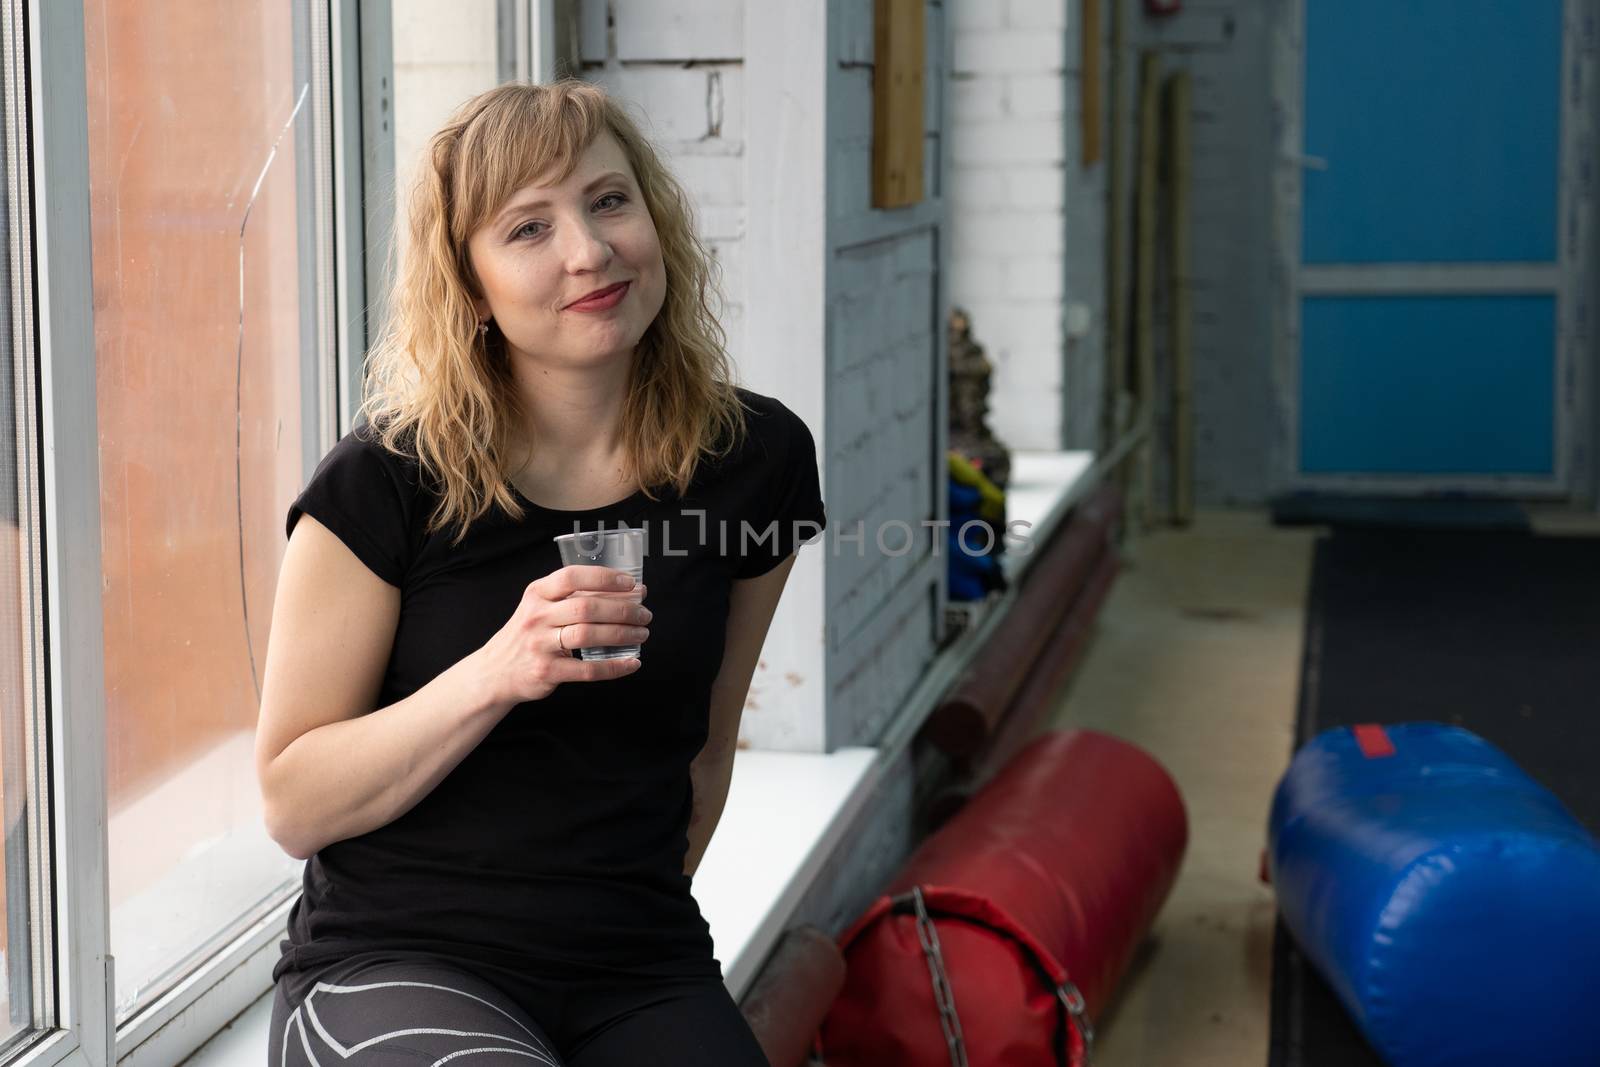 30-year-old woman with blond hair sits on a window sill against a window after a workout  by VADIM